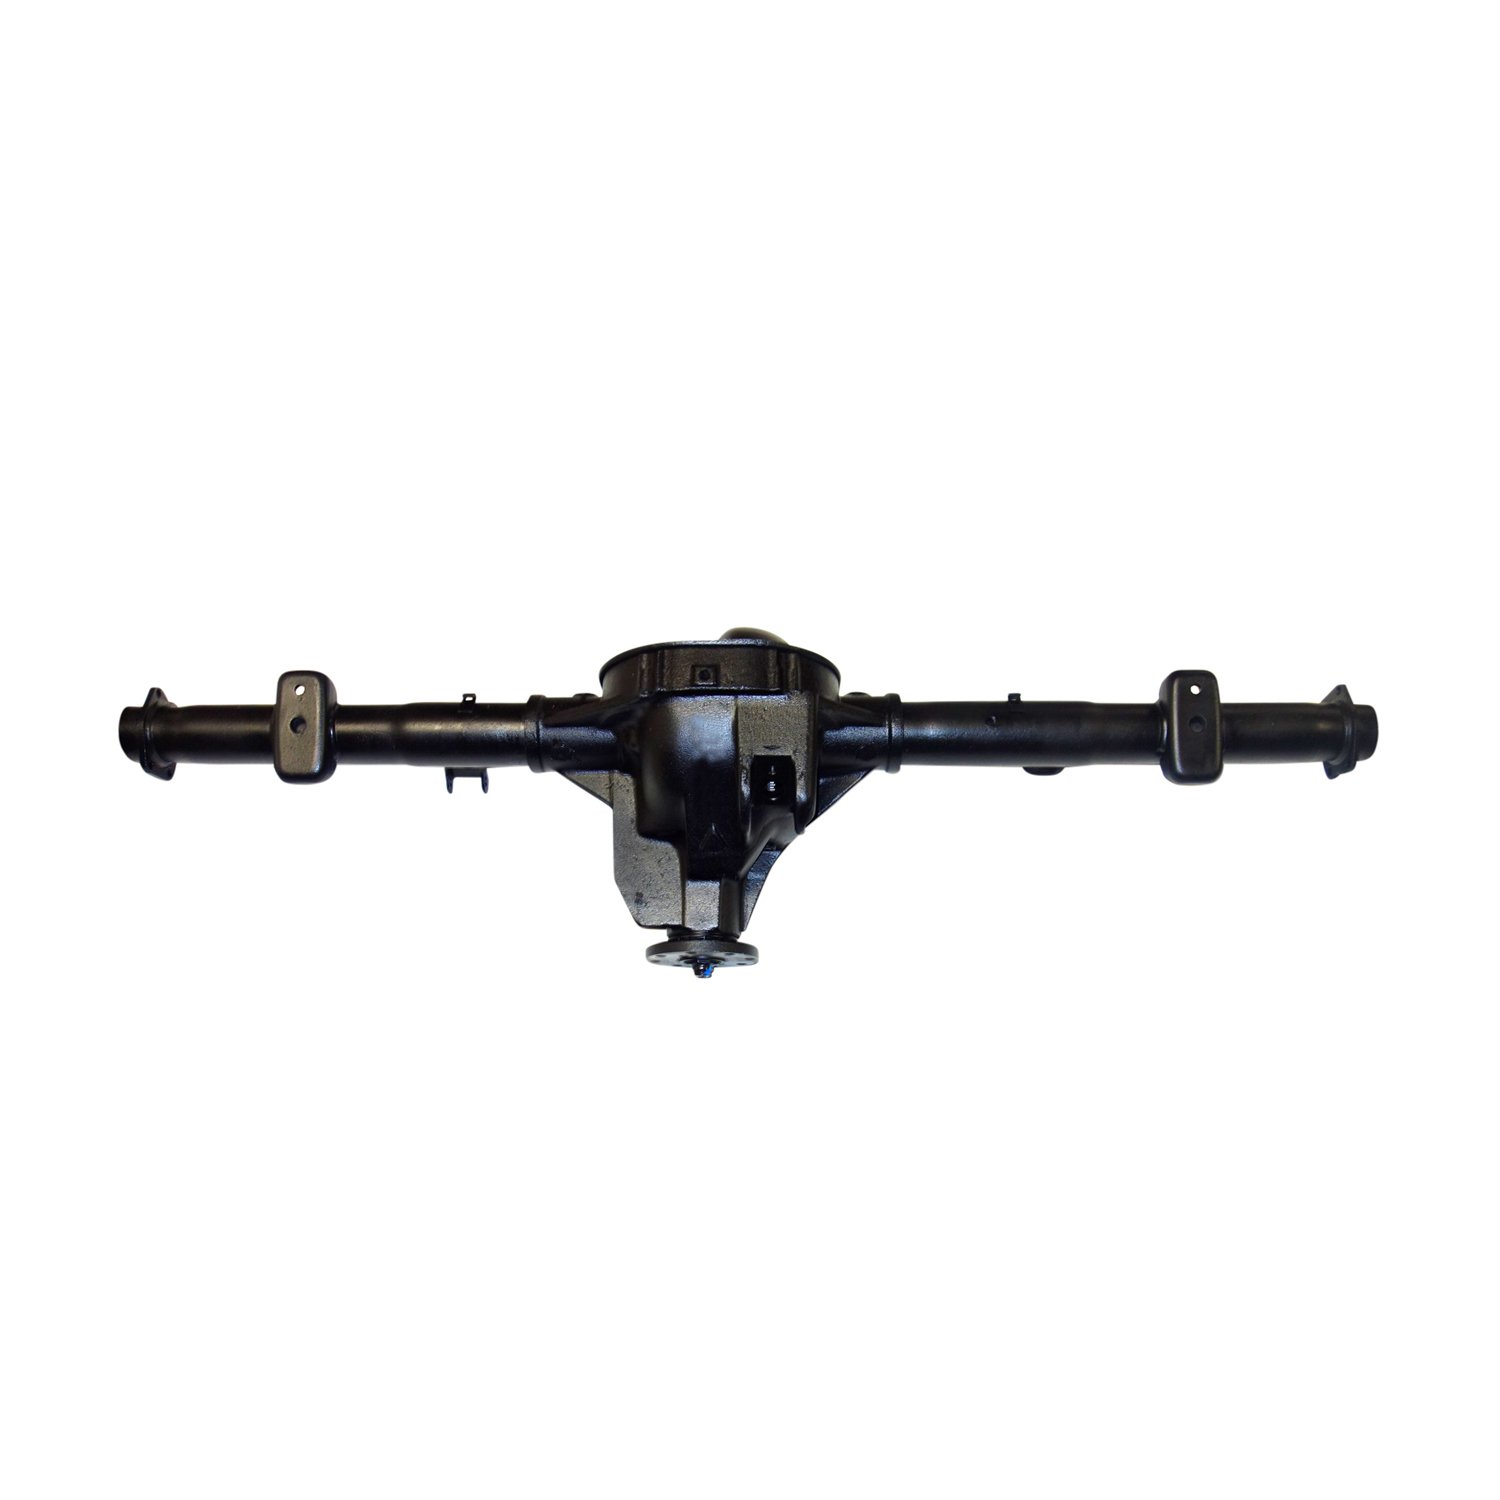 Remanufactured Axle Assy for 8.8" 91-94 & Mazda Explorer & Navajo 3.55 w/ ABS, Posi LSD